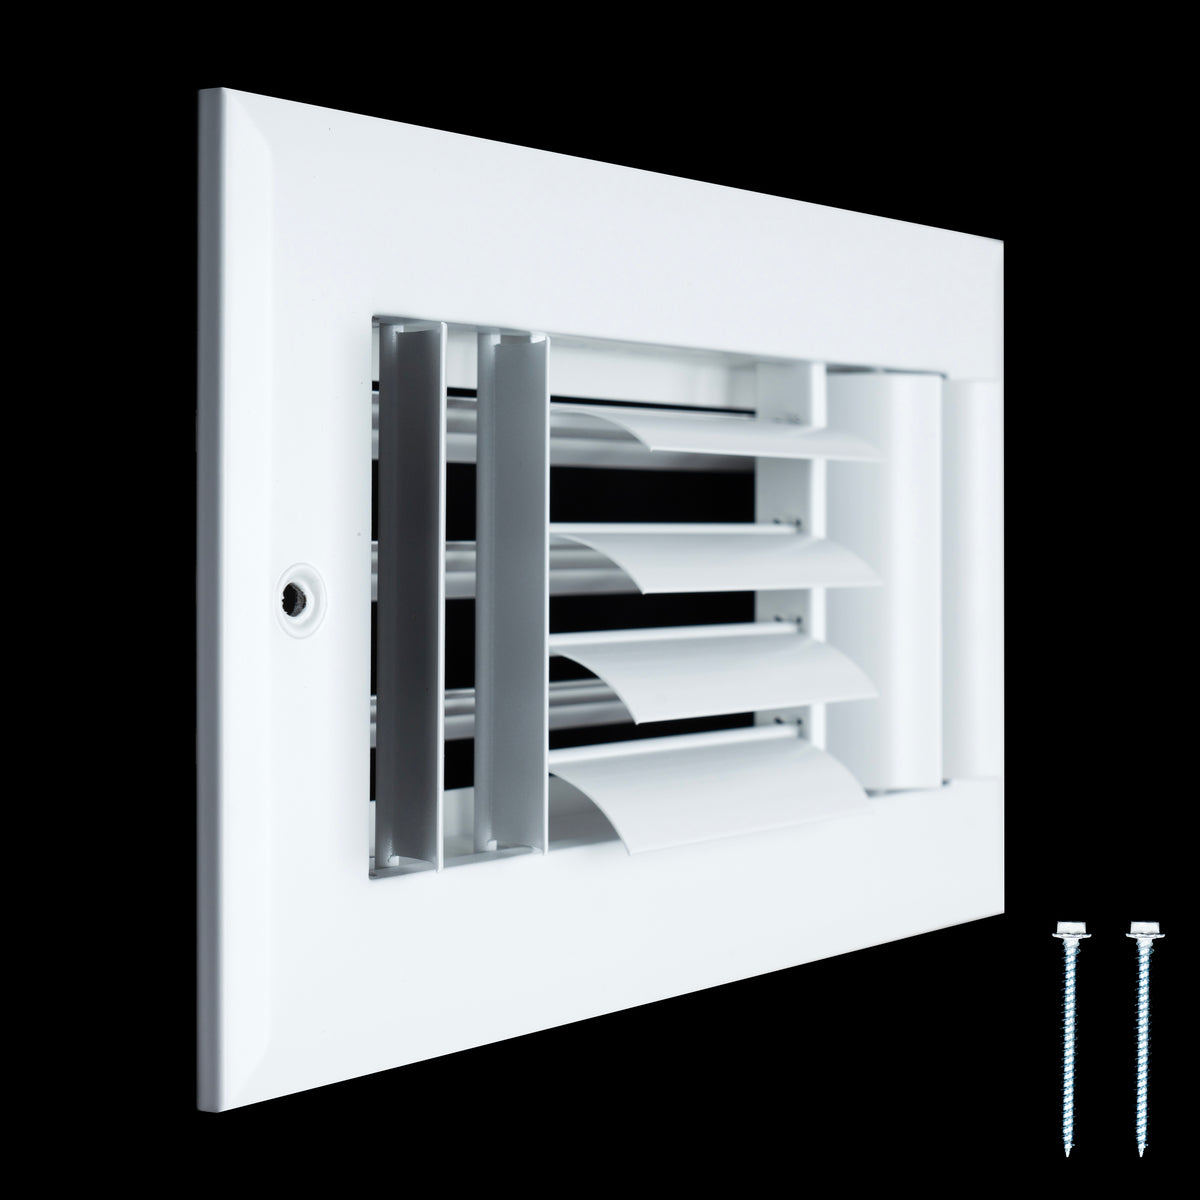 8"W x 4"H [Duct Opening] Aluminum 3-WAY Adjustable Air Supply Grille | Register Vent Cover Grill for Sidewall and Ceiling | White | Outer Dimensions: 9.75"W x 5.75"